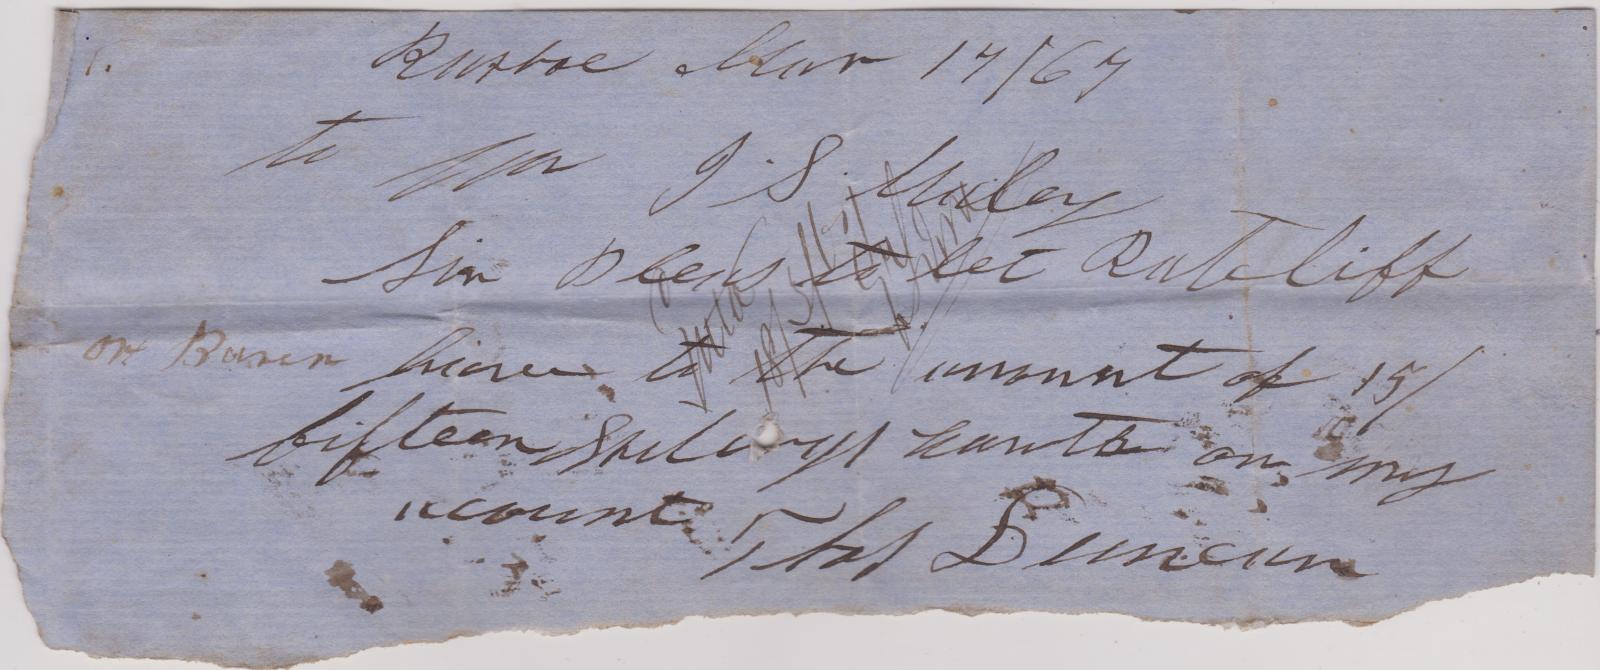 Promissory note from Thomas Duncan